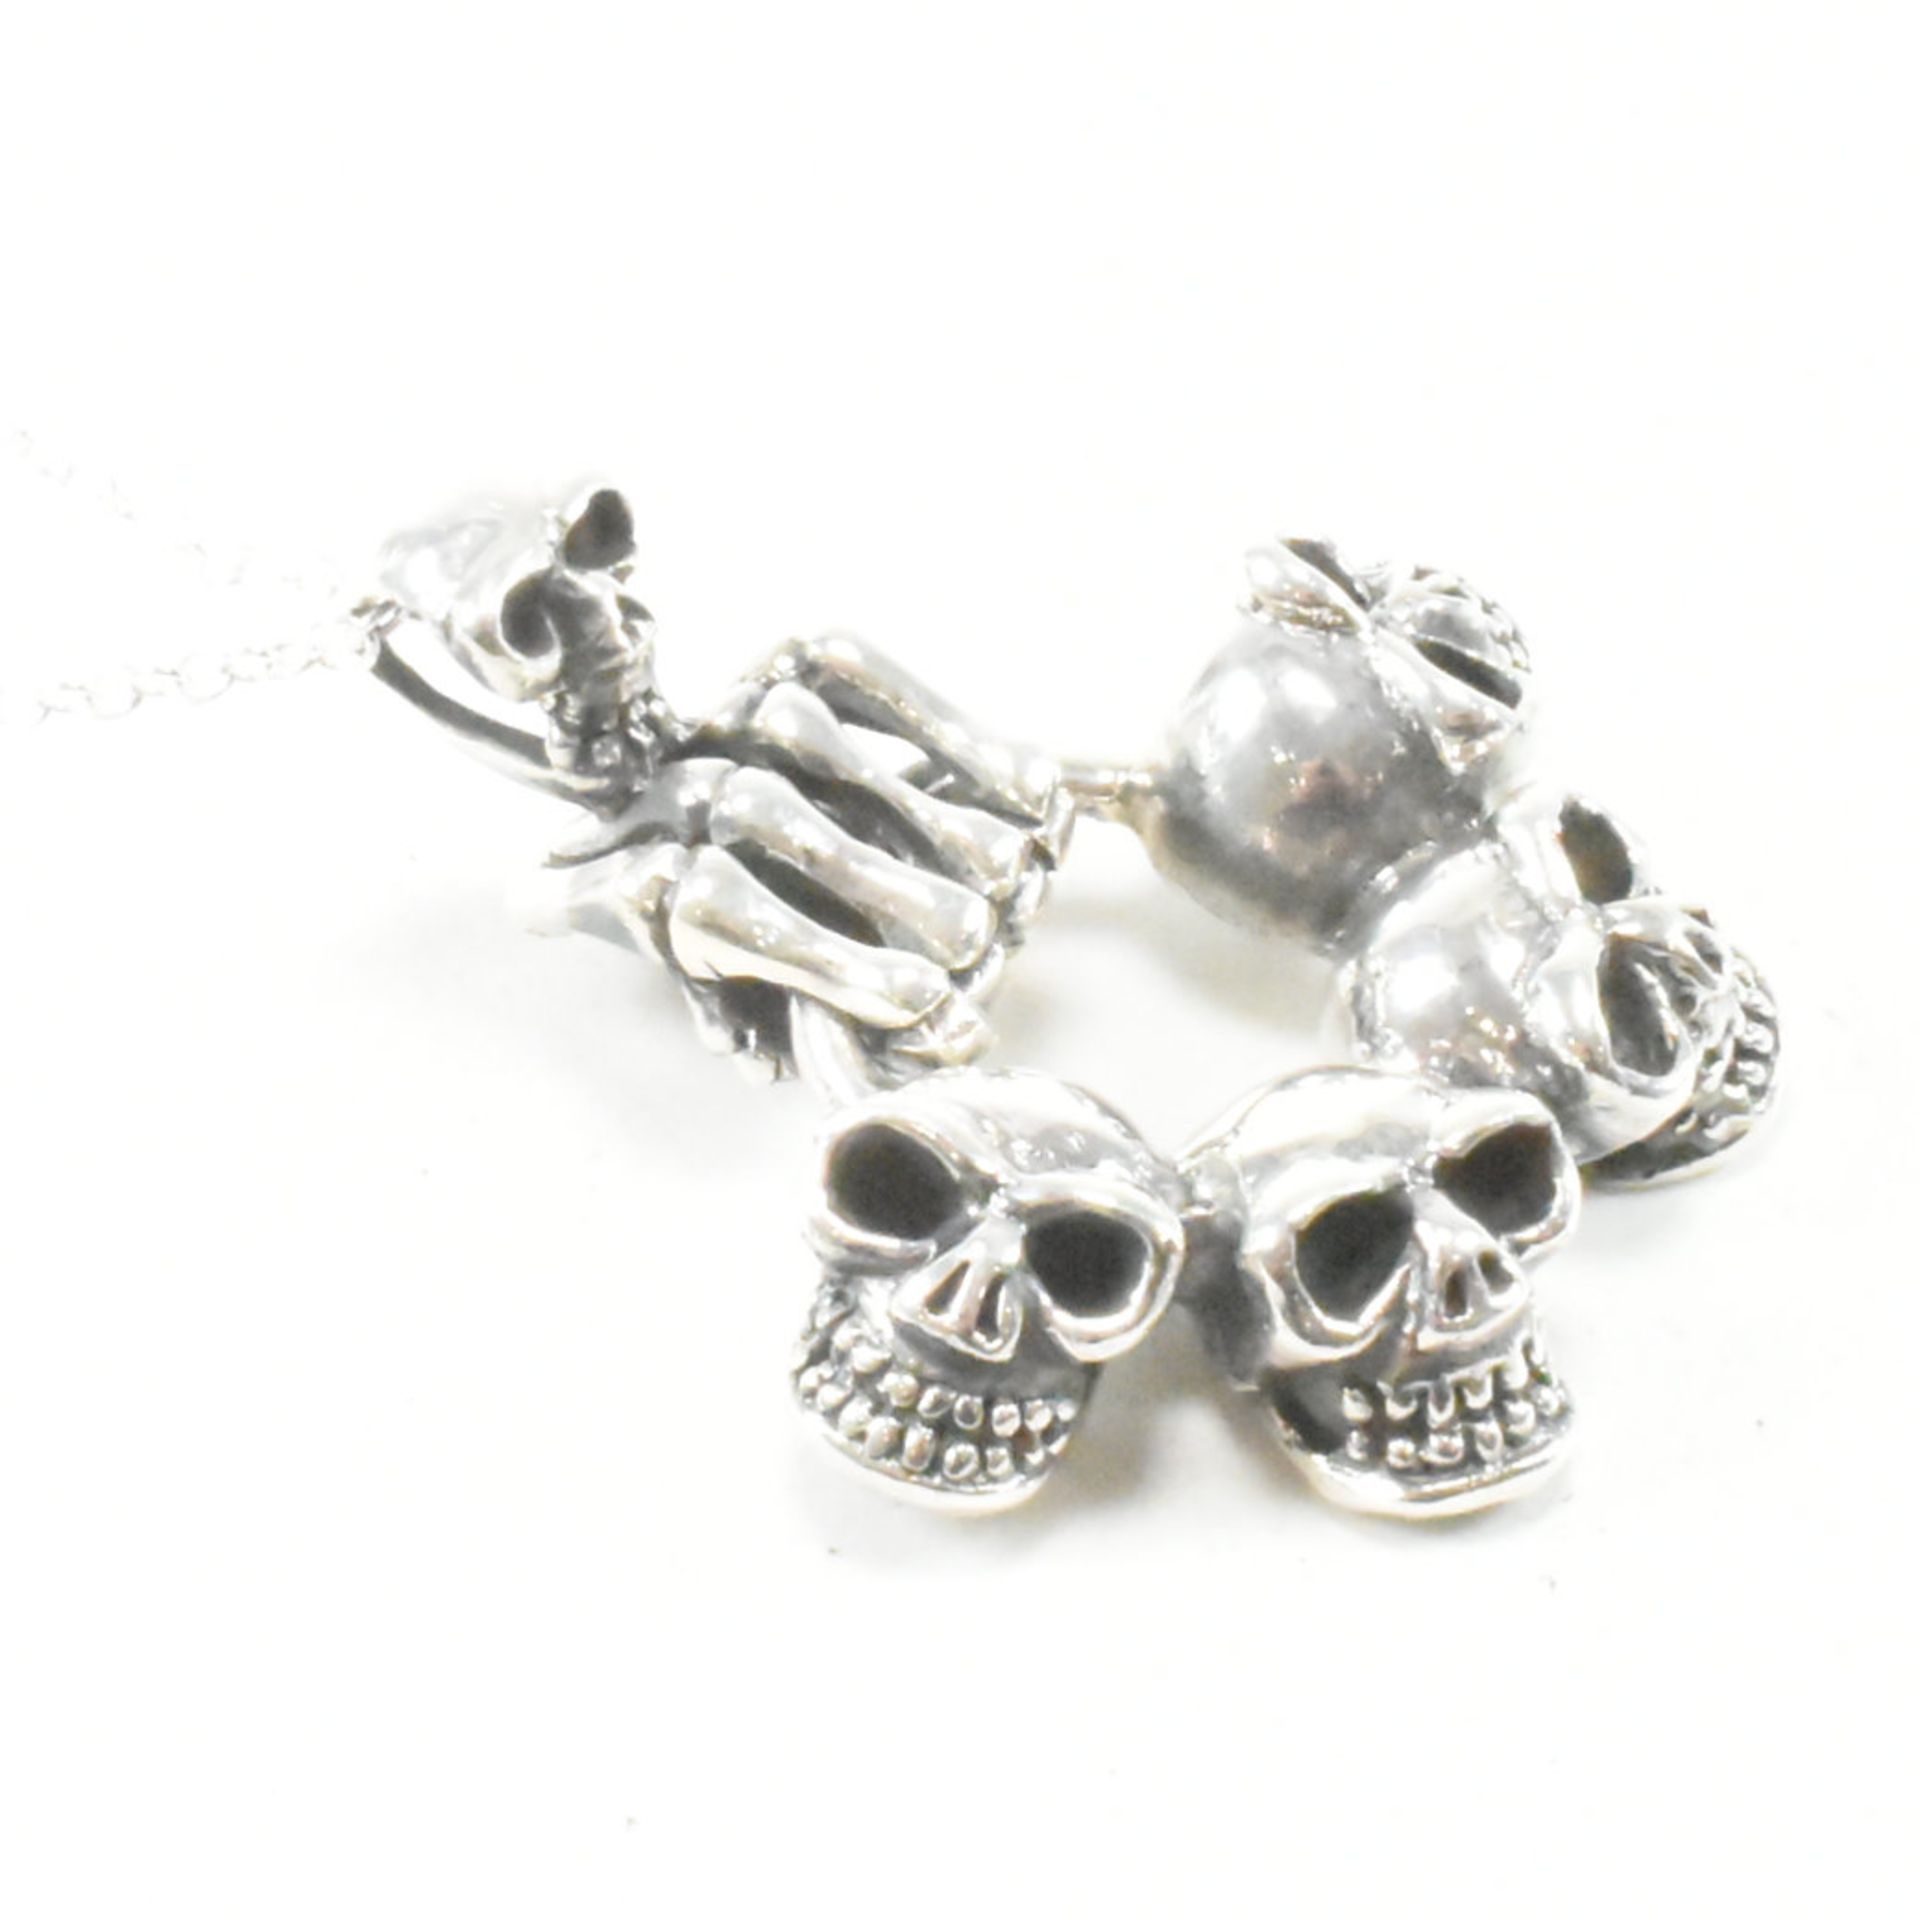 925 SILVER SKULL PENDANT NECKLACE - Image 4 of 5